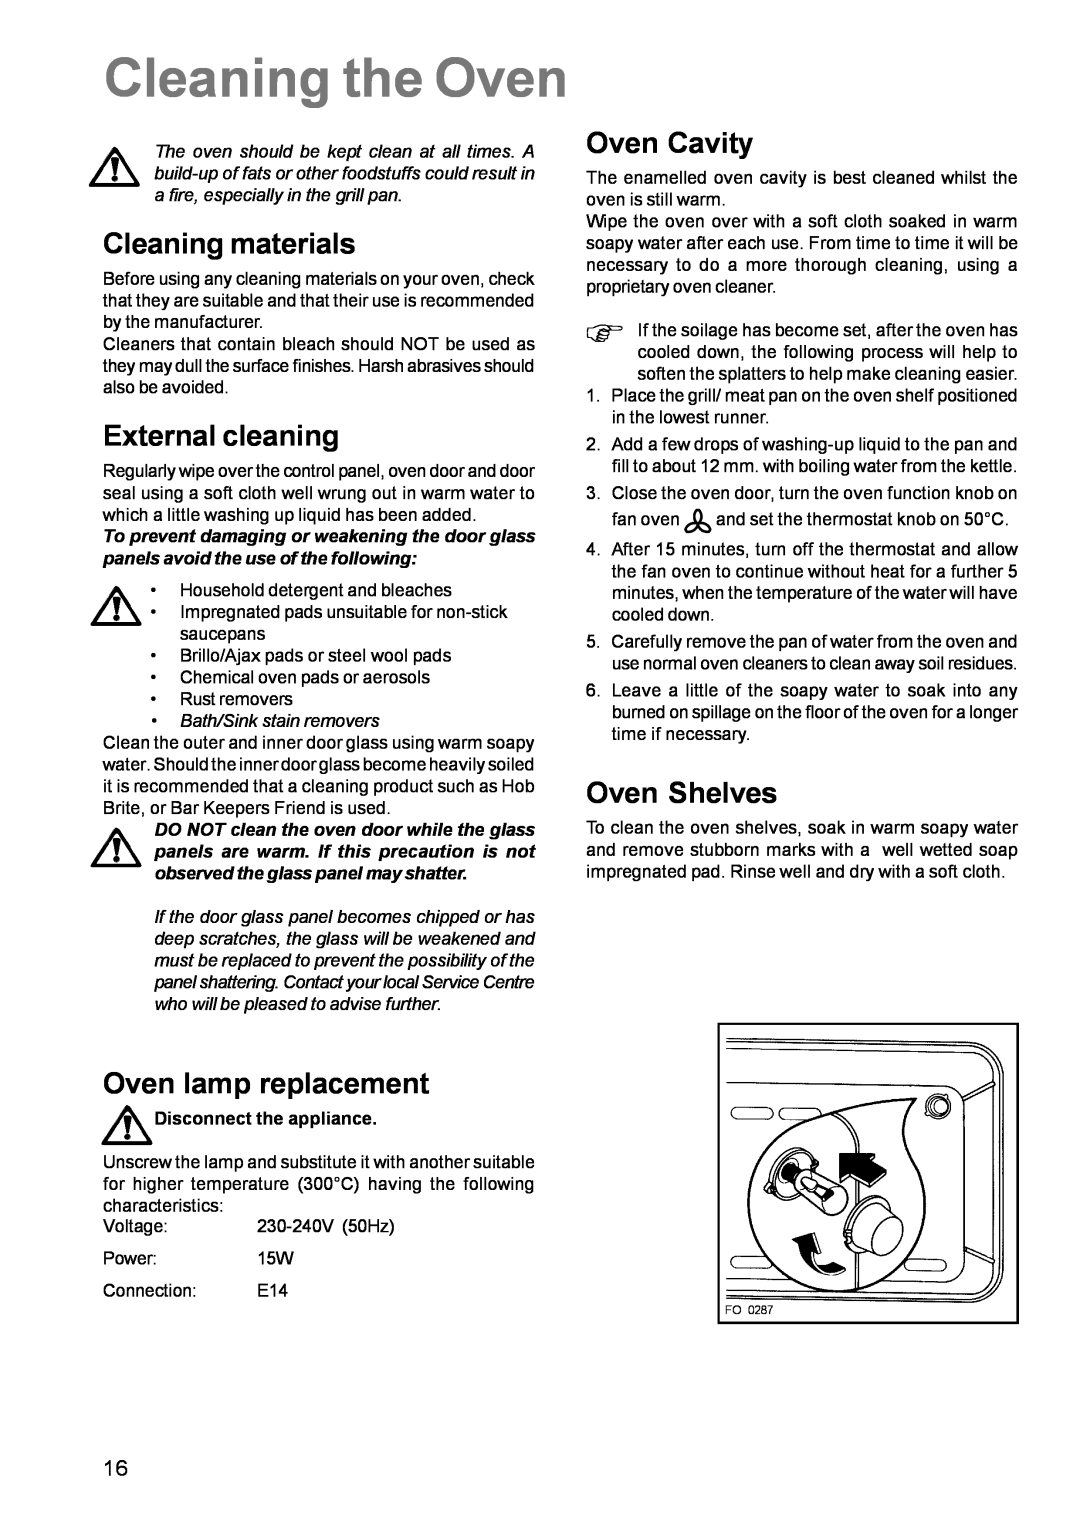 Zanussi ZCM 611 Cleaning the Oven, Cleaning materials, External cleaning, Oven Cavity, Oven Shelves, Oven lamp replacement 